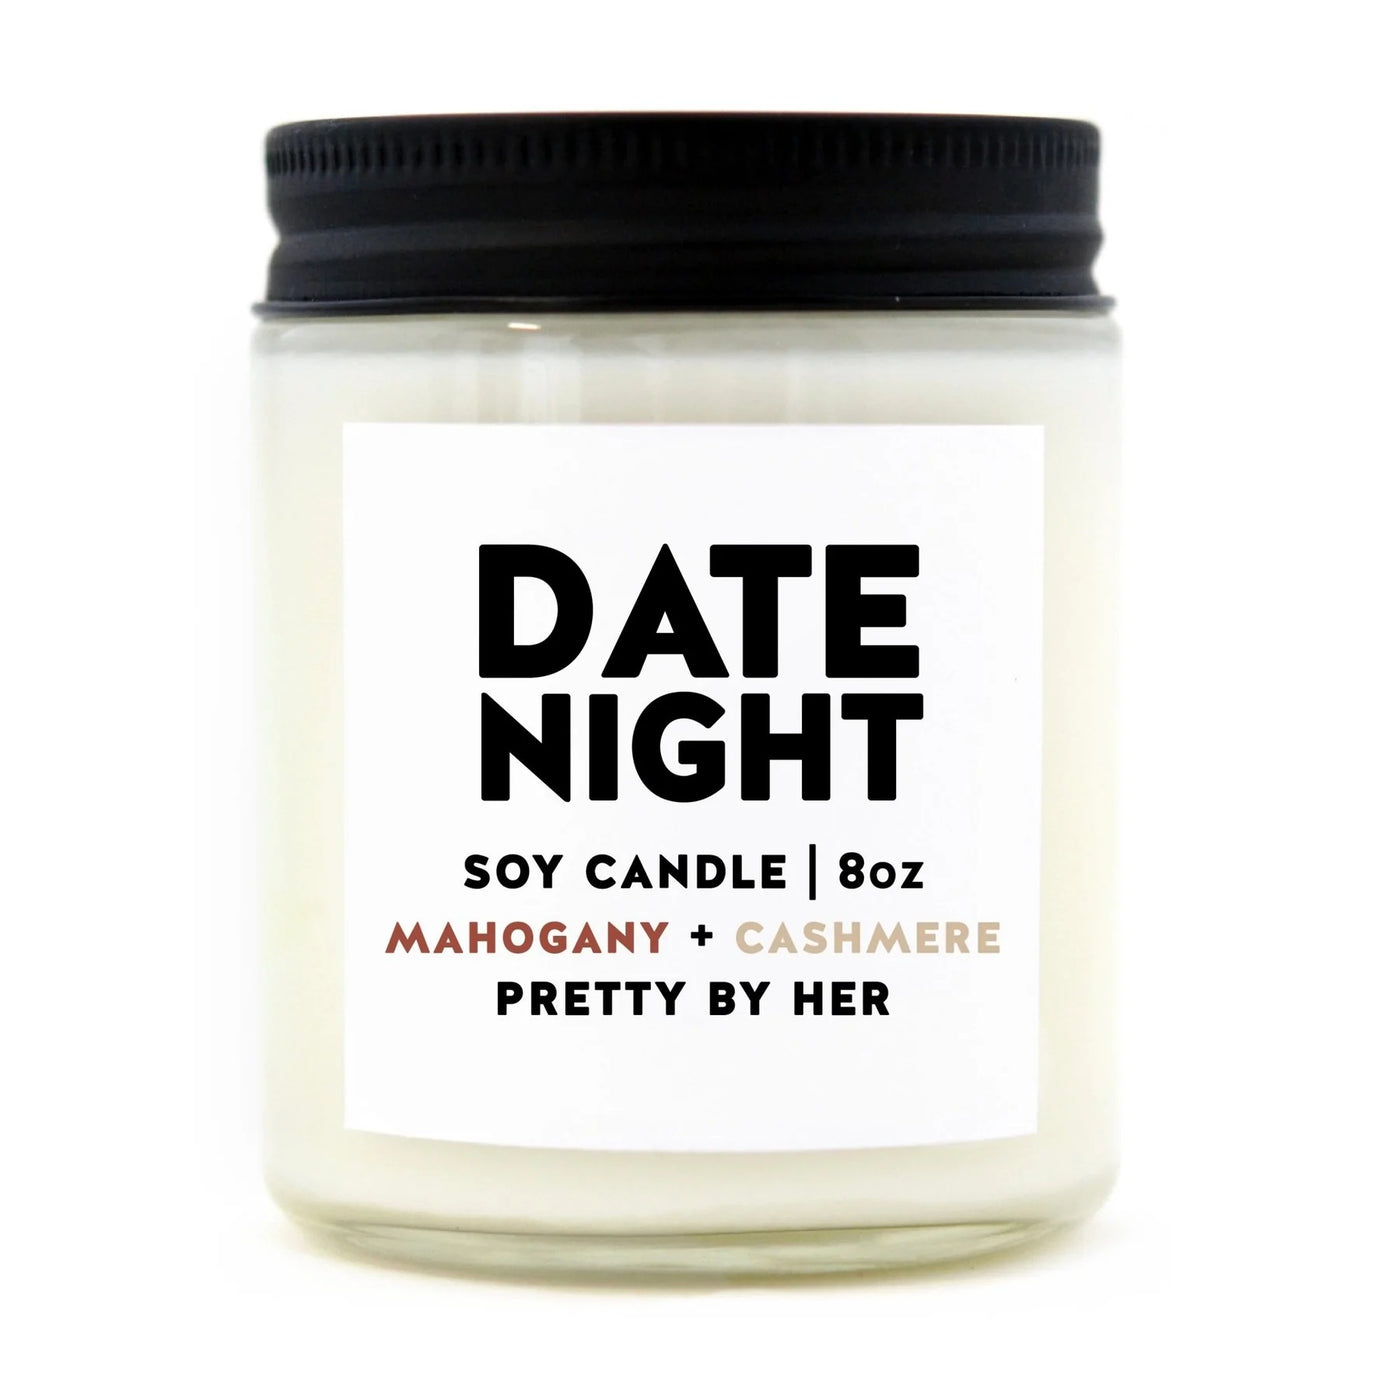 DATE NIGHT CANDLE